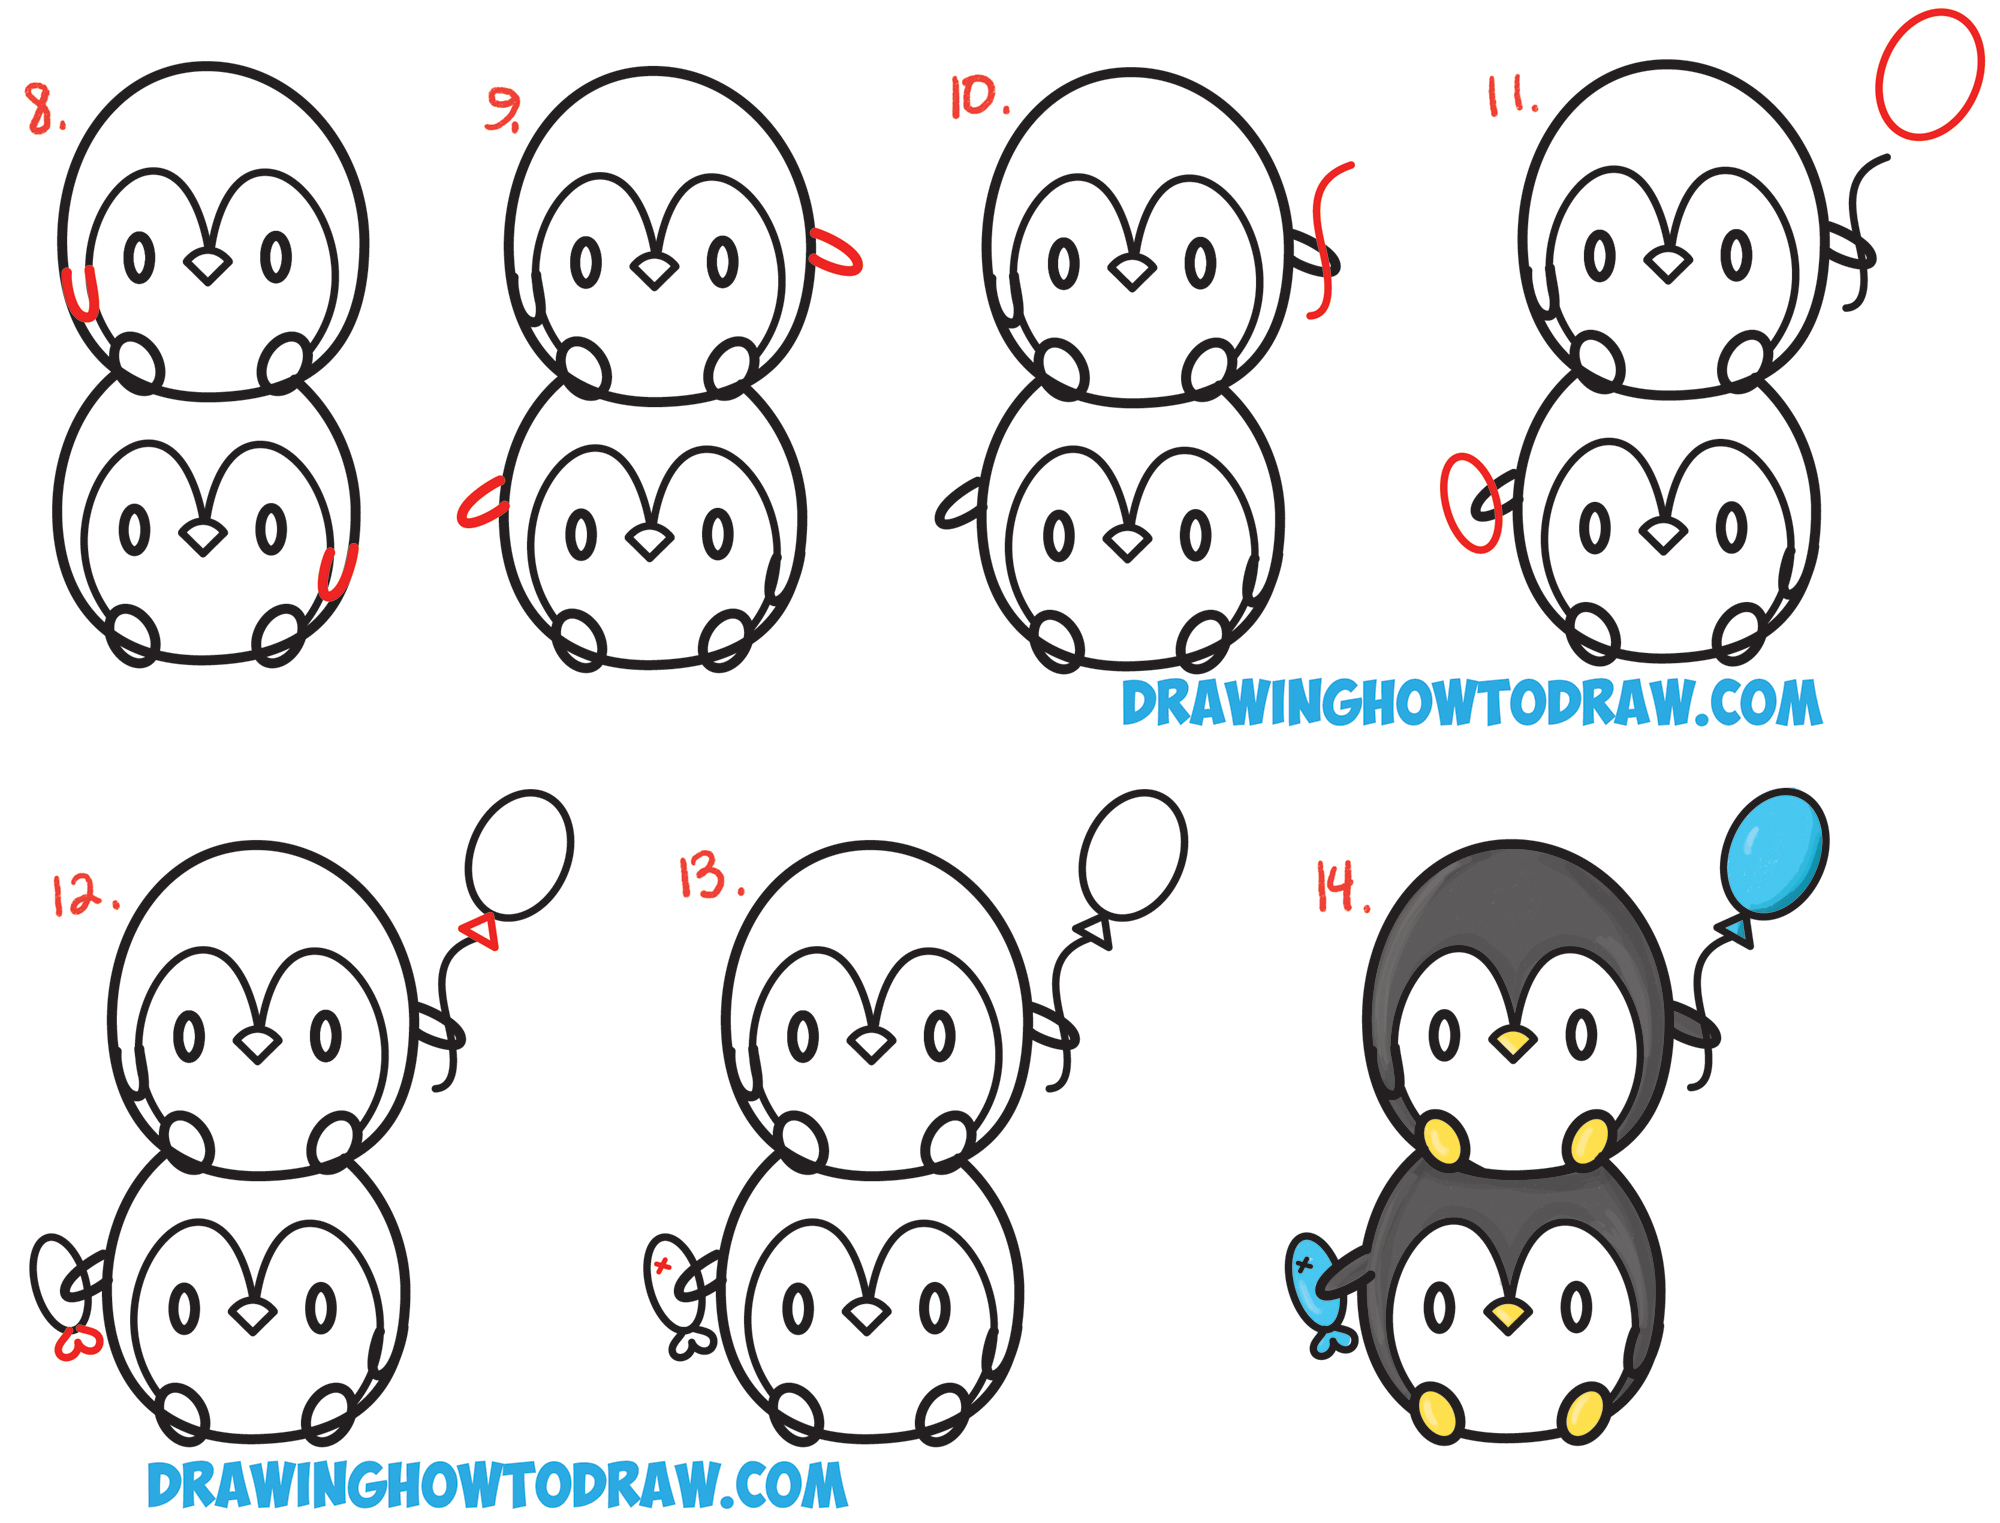 how to draw cute kawaii chibi stacked penguins easy step by step drawing tutorial kids 02